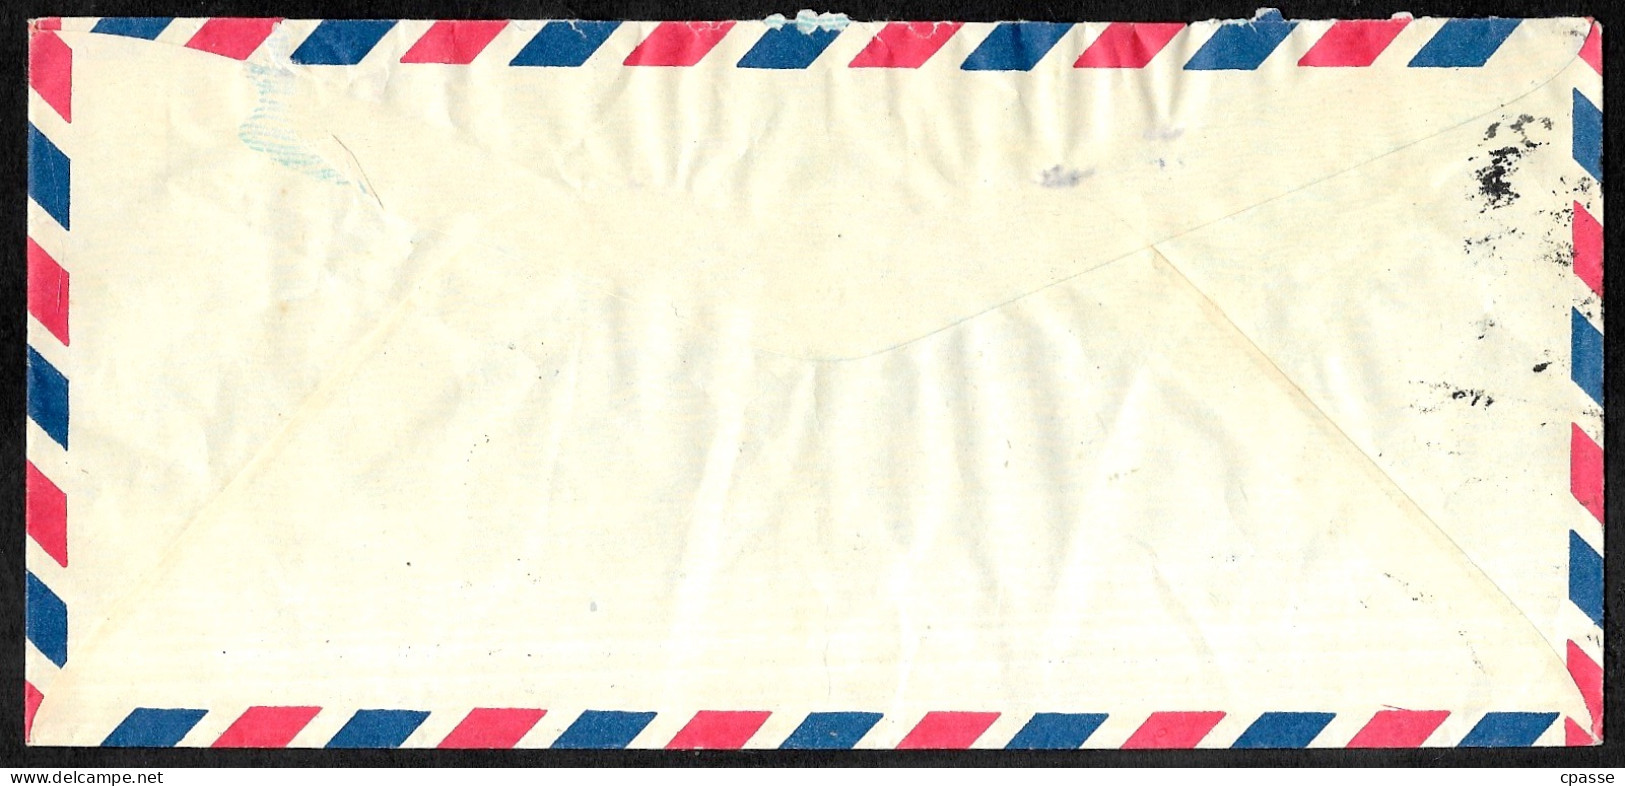 1979 Lettre (5 Stamps) Republic Of CHINA TAIWAN (Formose) Taipei To France POSTE AERIENNE By Air Mail - Airmail